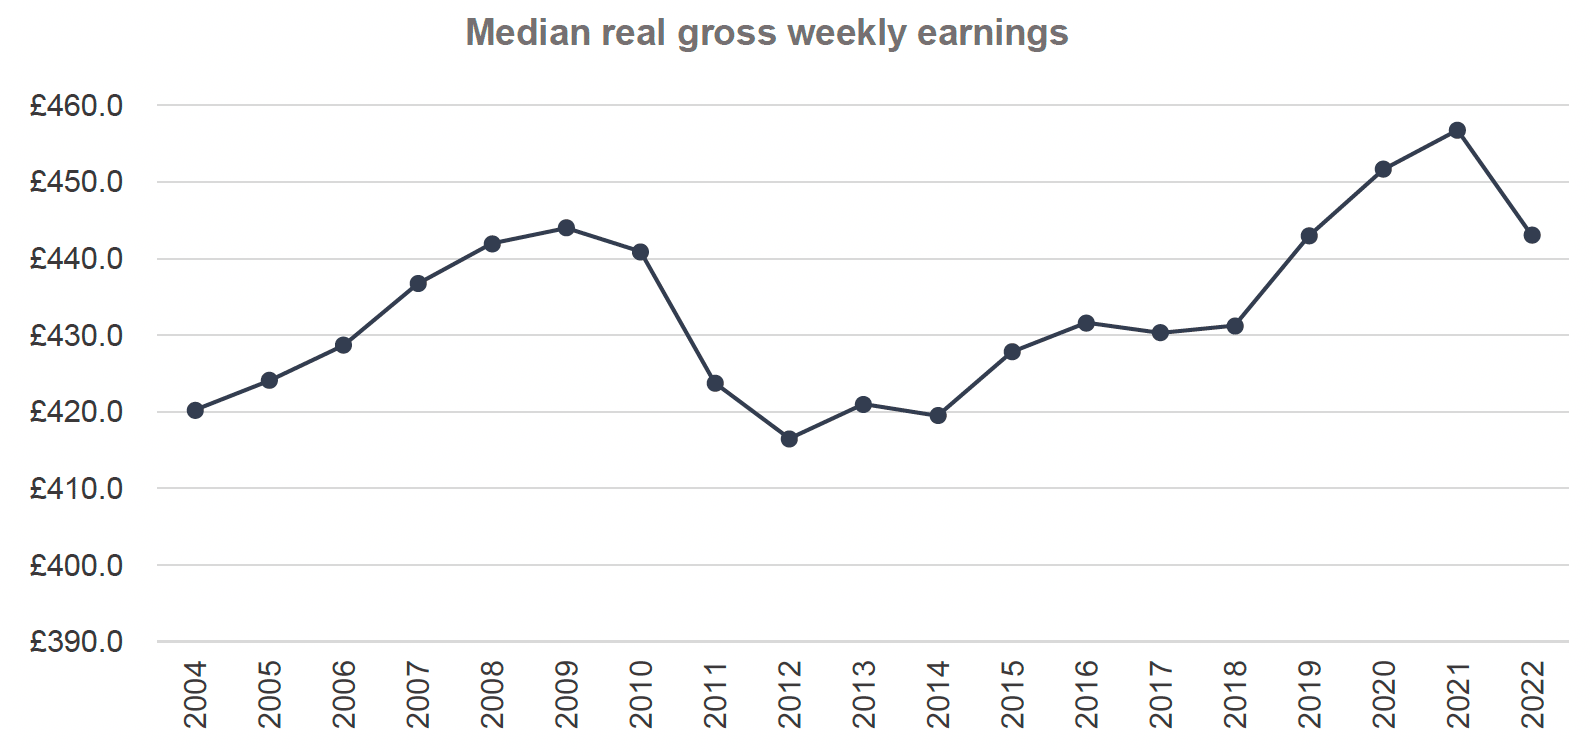 Graph depicts the trend of median real gross weekly earnings in pounds Sterling between 2004-2022, in Scotland, in a line chart. The trend fluctuates yet is overall increasing across the time period. In 2004 the real median real gross weekly earnings were £420.2. In 2005 the real median real gross weekly earnings were £424.1. In 2006 the real median real gross weekly earnings were £428.7. In 2007, the real median real gross weekly earnings were £436.7. In 2008, the real median real gross weekly earnings were £442. In 2009, the real median real gross weekly earnings were £444. In 2010, the real median real gross weekly earnings were £440.9. In 2011, the real median real gross weekly earnings were £423.7. In 2012, the real median real gross weekly earnings were £416.5. In 2013, the real median real gross weekly earnings were £421. In 2014, the real median real gross weekly earnings were £419.5. In 2015, the real median real gross weekly earnings were £427.8. In 2016, the real median real gross weekly earnings were £431.6. In 2017, the real median real gross weekly earnings were £430.6. In 2018, the real median real gross weekly earnings were £431.3. In 2019, the real median real gross weekly earnings were £443. In 2020, the real median real gross weekly earnings were £451.7. In 2021, the real median real gross weekly earnings were £456.8. In 2022, the real median real gross weekly earnings were £443.1.